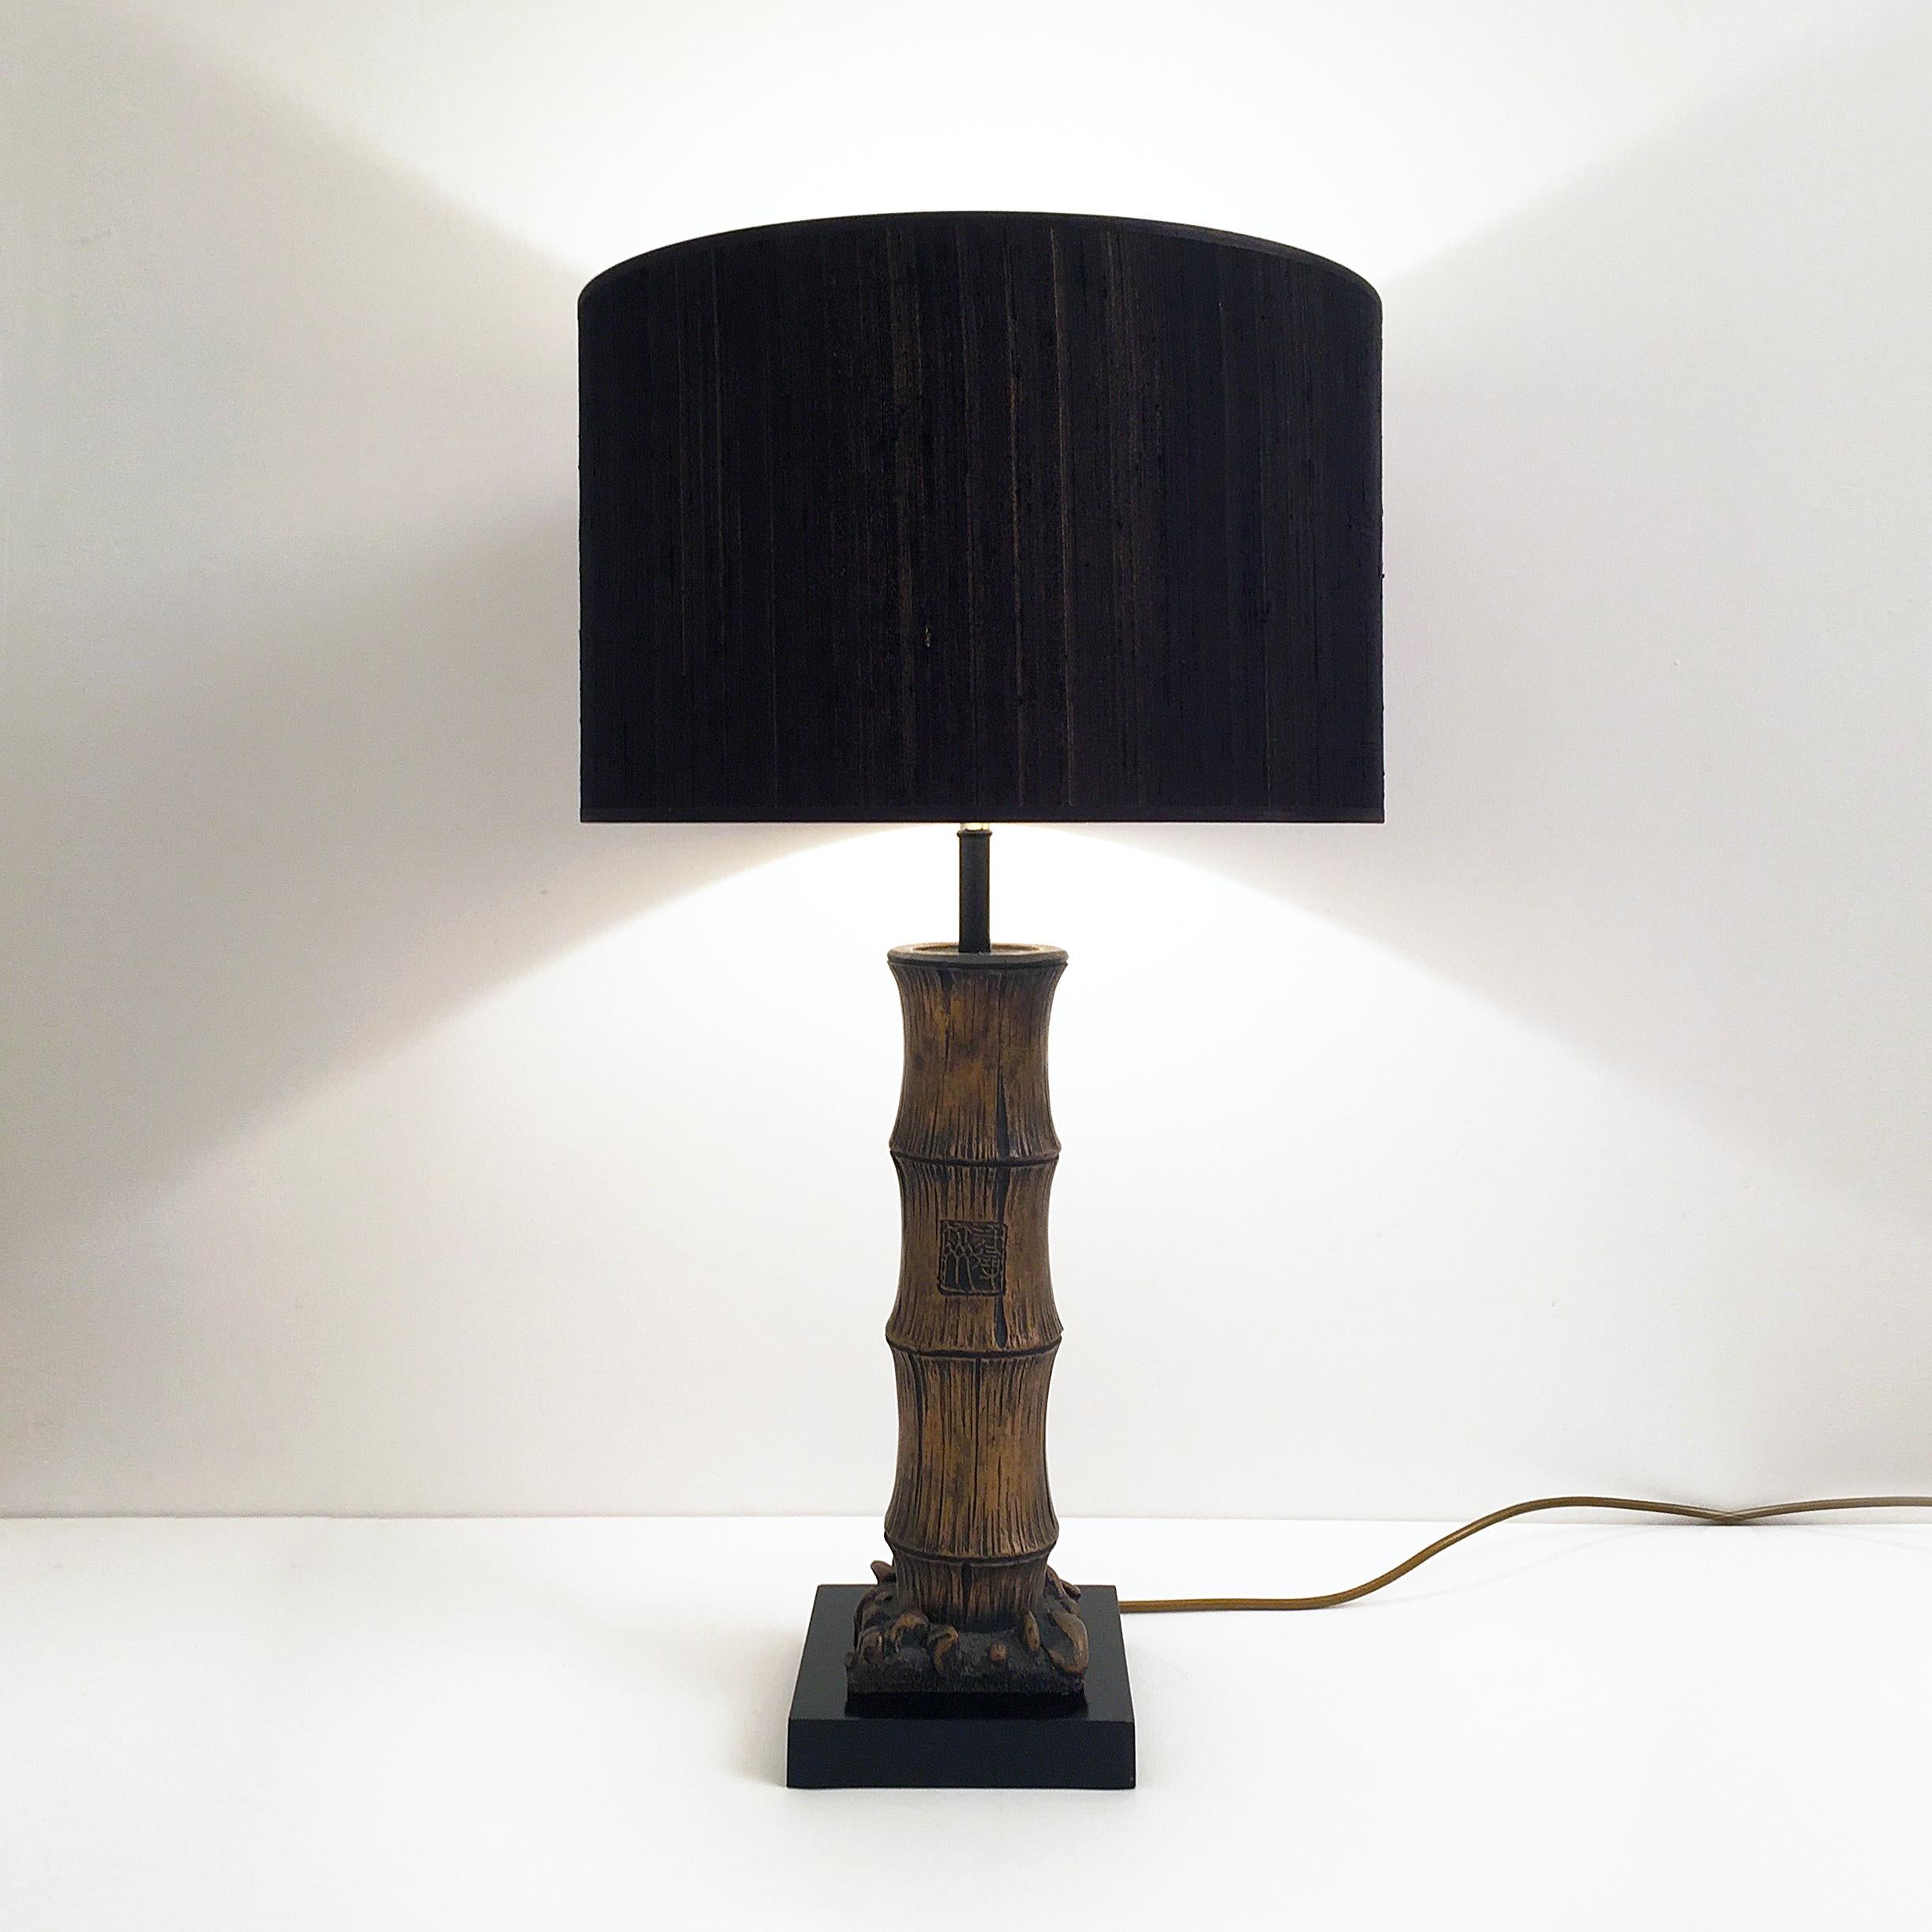 Impressive wood carved faux-bamboo table lamp, with Chinese-stamped lettering on an ebonized base (lamp shade is for display purposes only). 

CREATOR: Unknown 

PLACE OF ORIGIN: France

DATE OF MANUFACTURE: c. 1970's

PERIOD: 1970 - 1979

MATERIALS